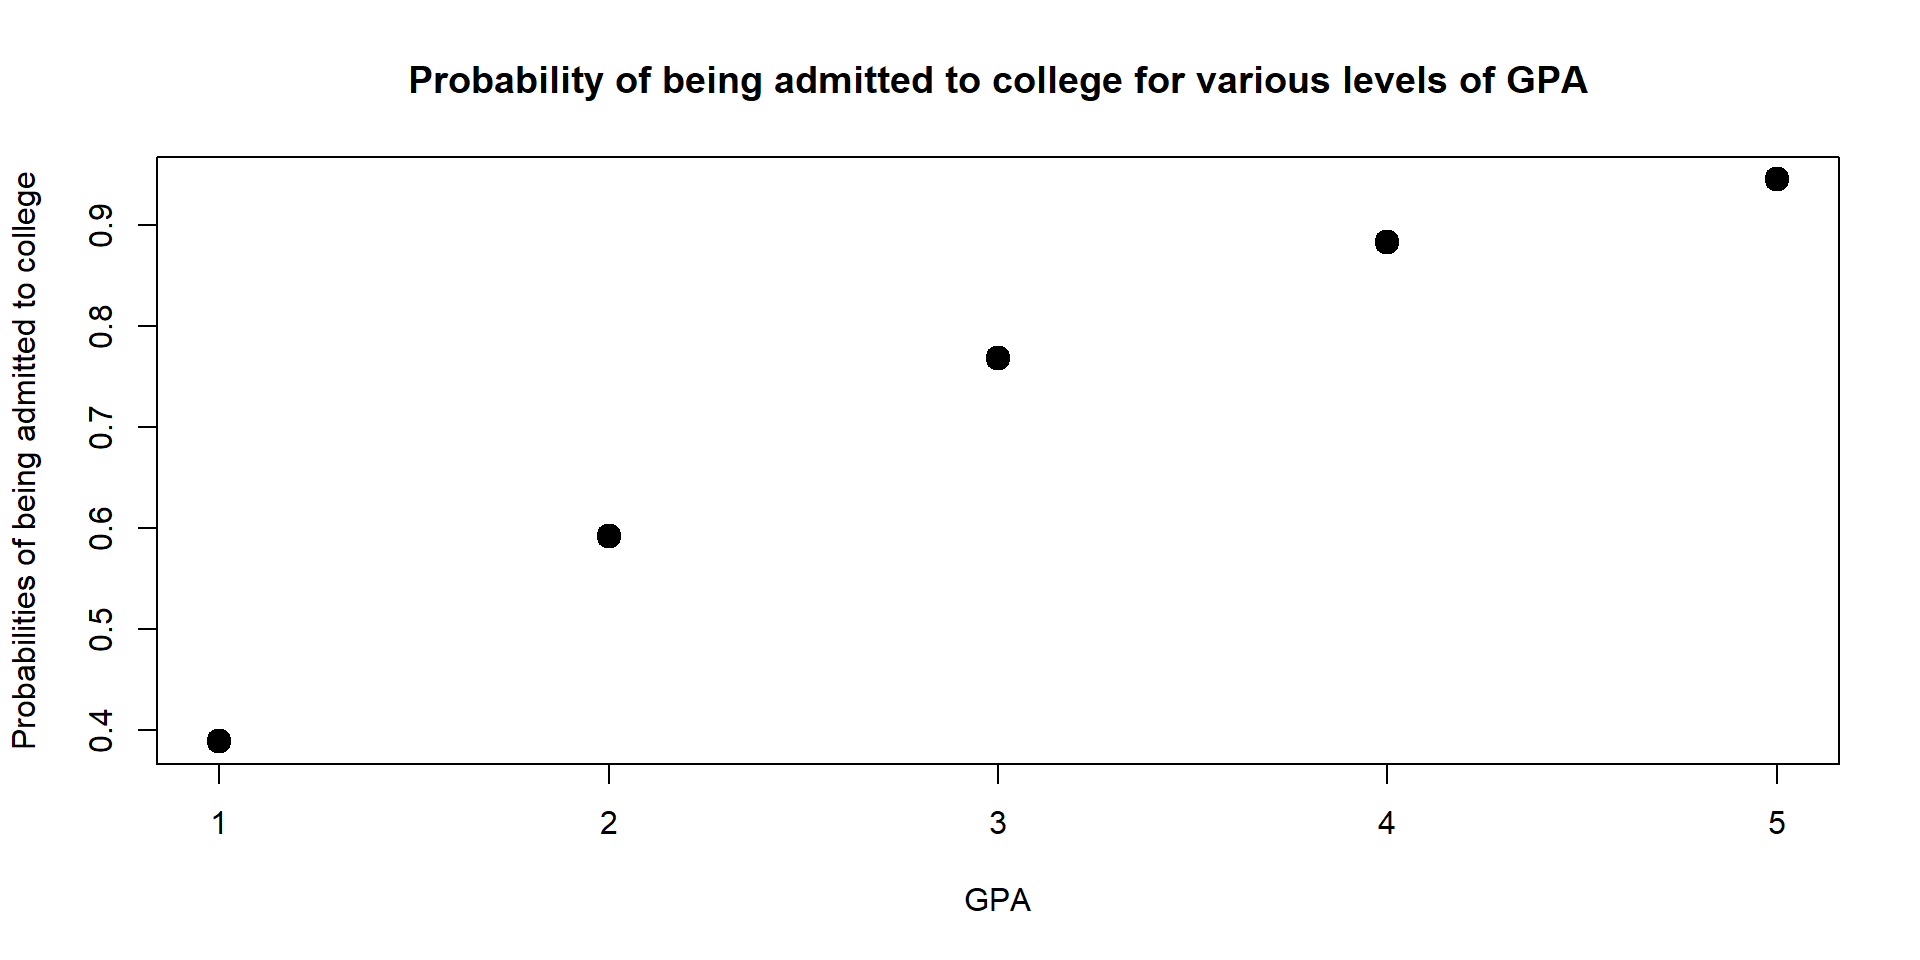 Probability of being admit based on GPA